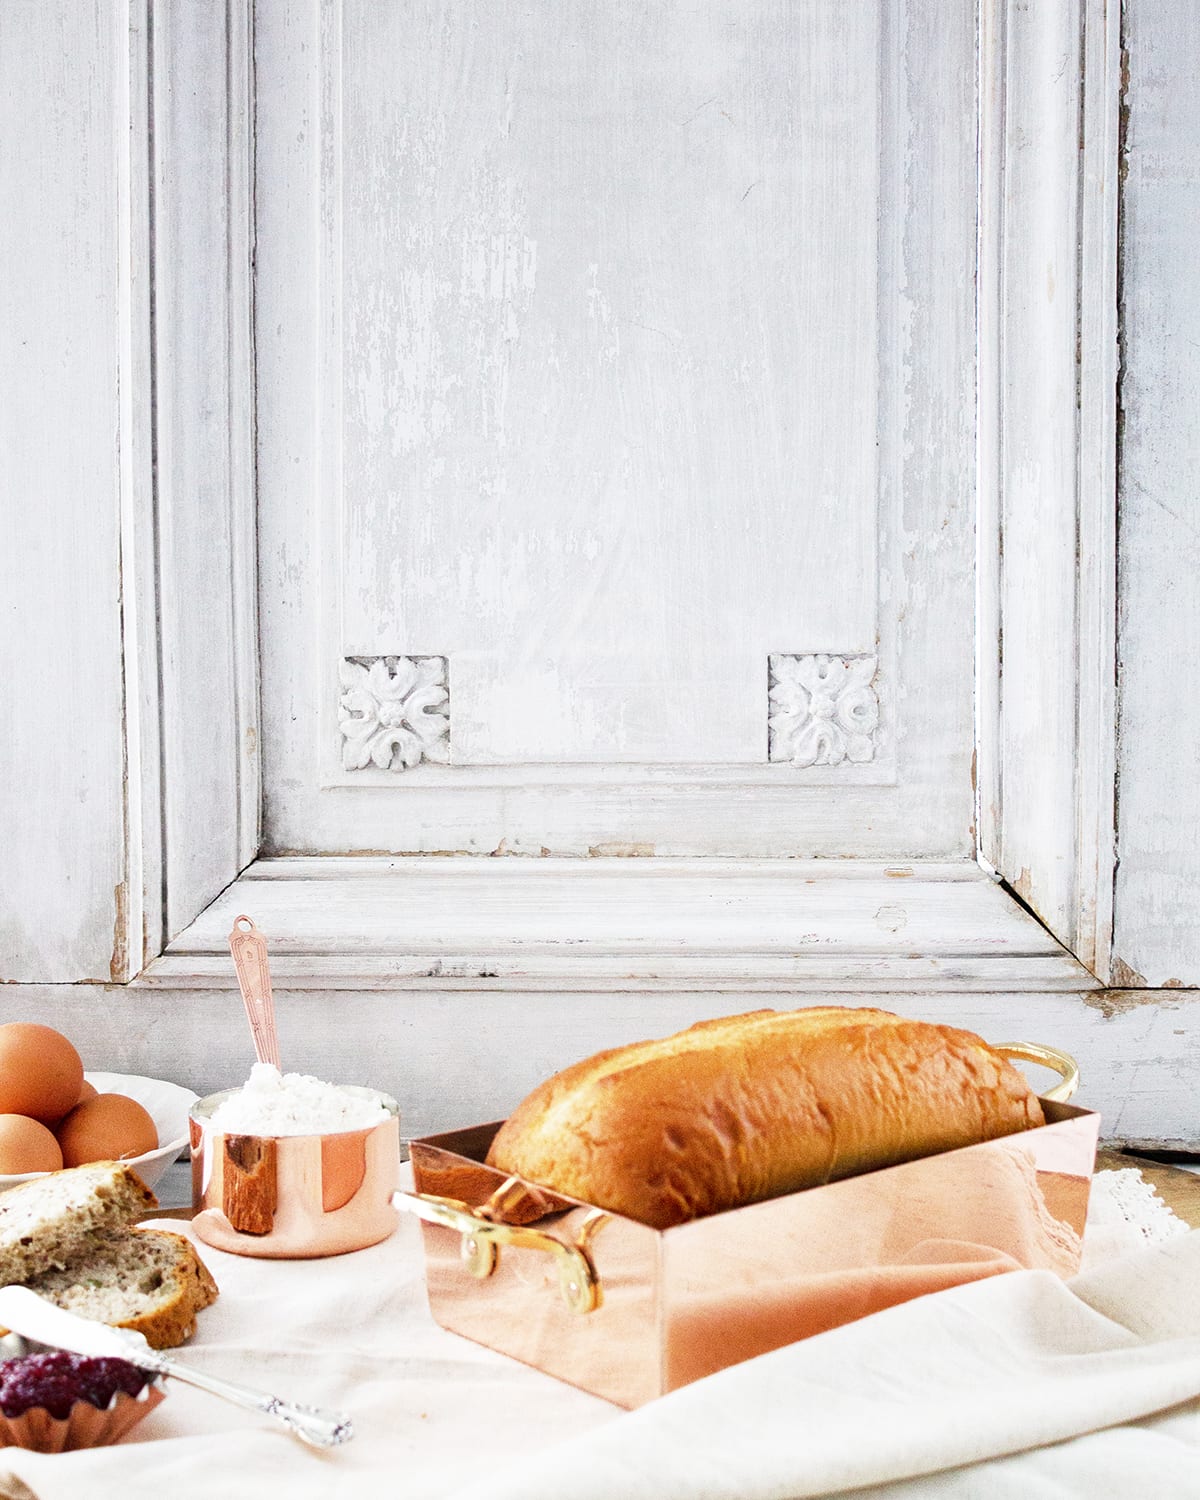 Shop Coppermill Kitchen Vintage-inspired Copper Bread Pan